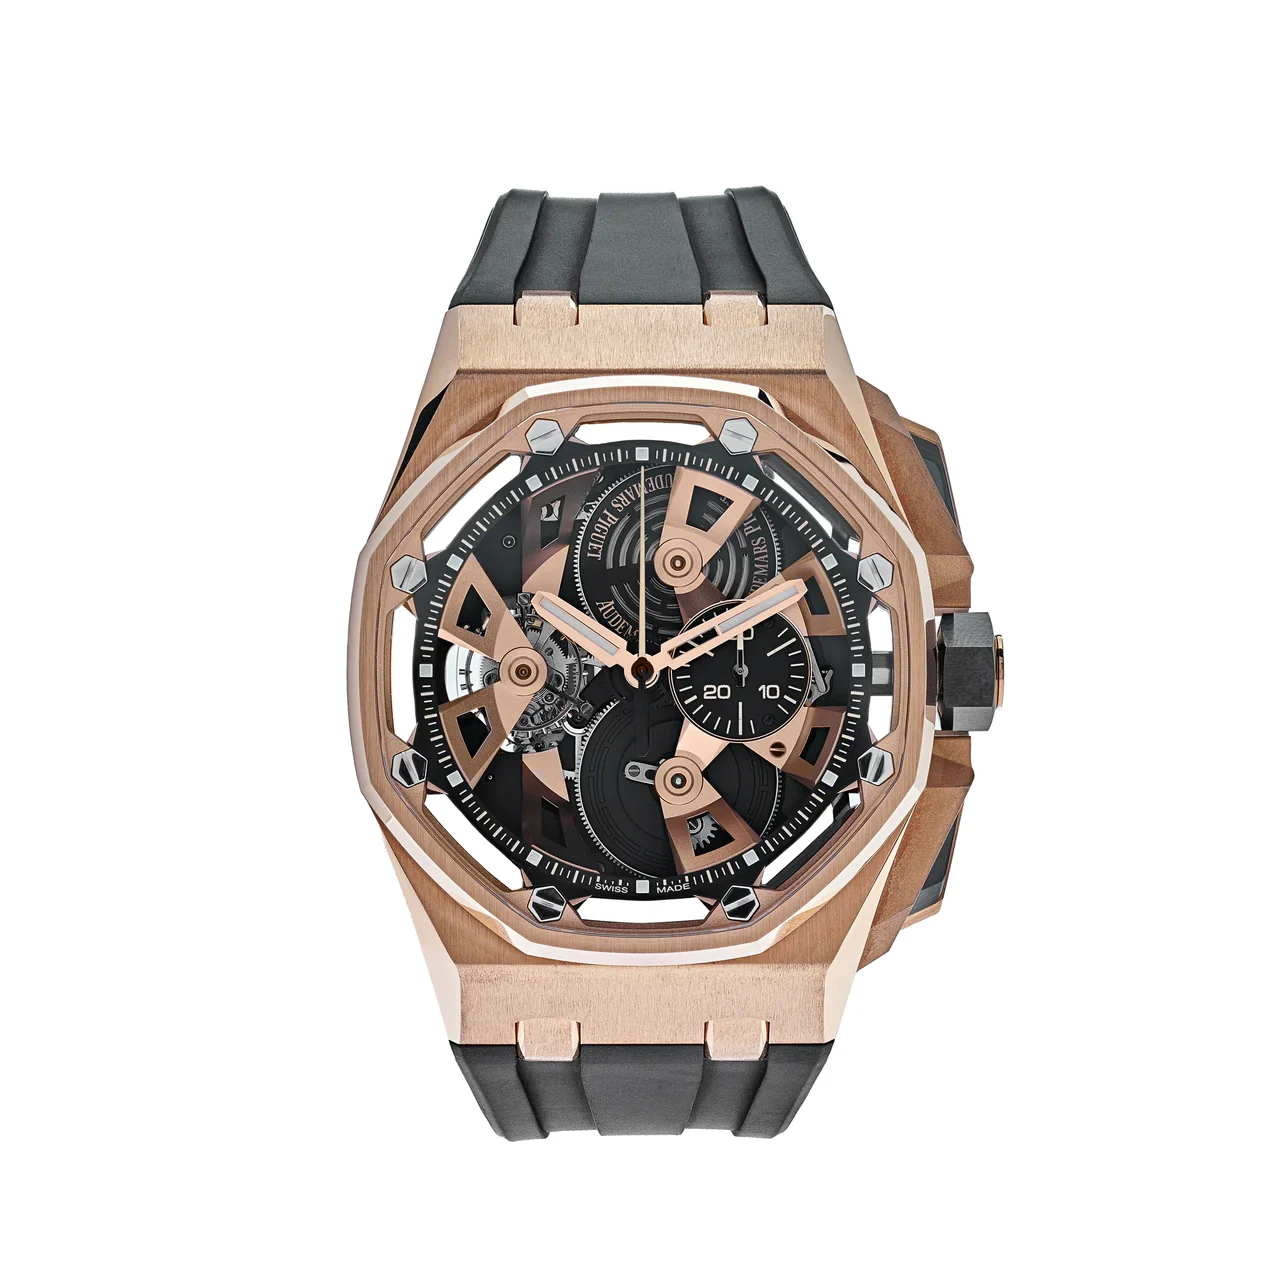 Audemars Piguet Royal Oak Offshore Tourbillon Chronograph 45 Rose Gold - Offshore 25th Anniversary - Limited to 50 Pieces 26421OR.OO.A002CA.01 Listing Image 1